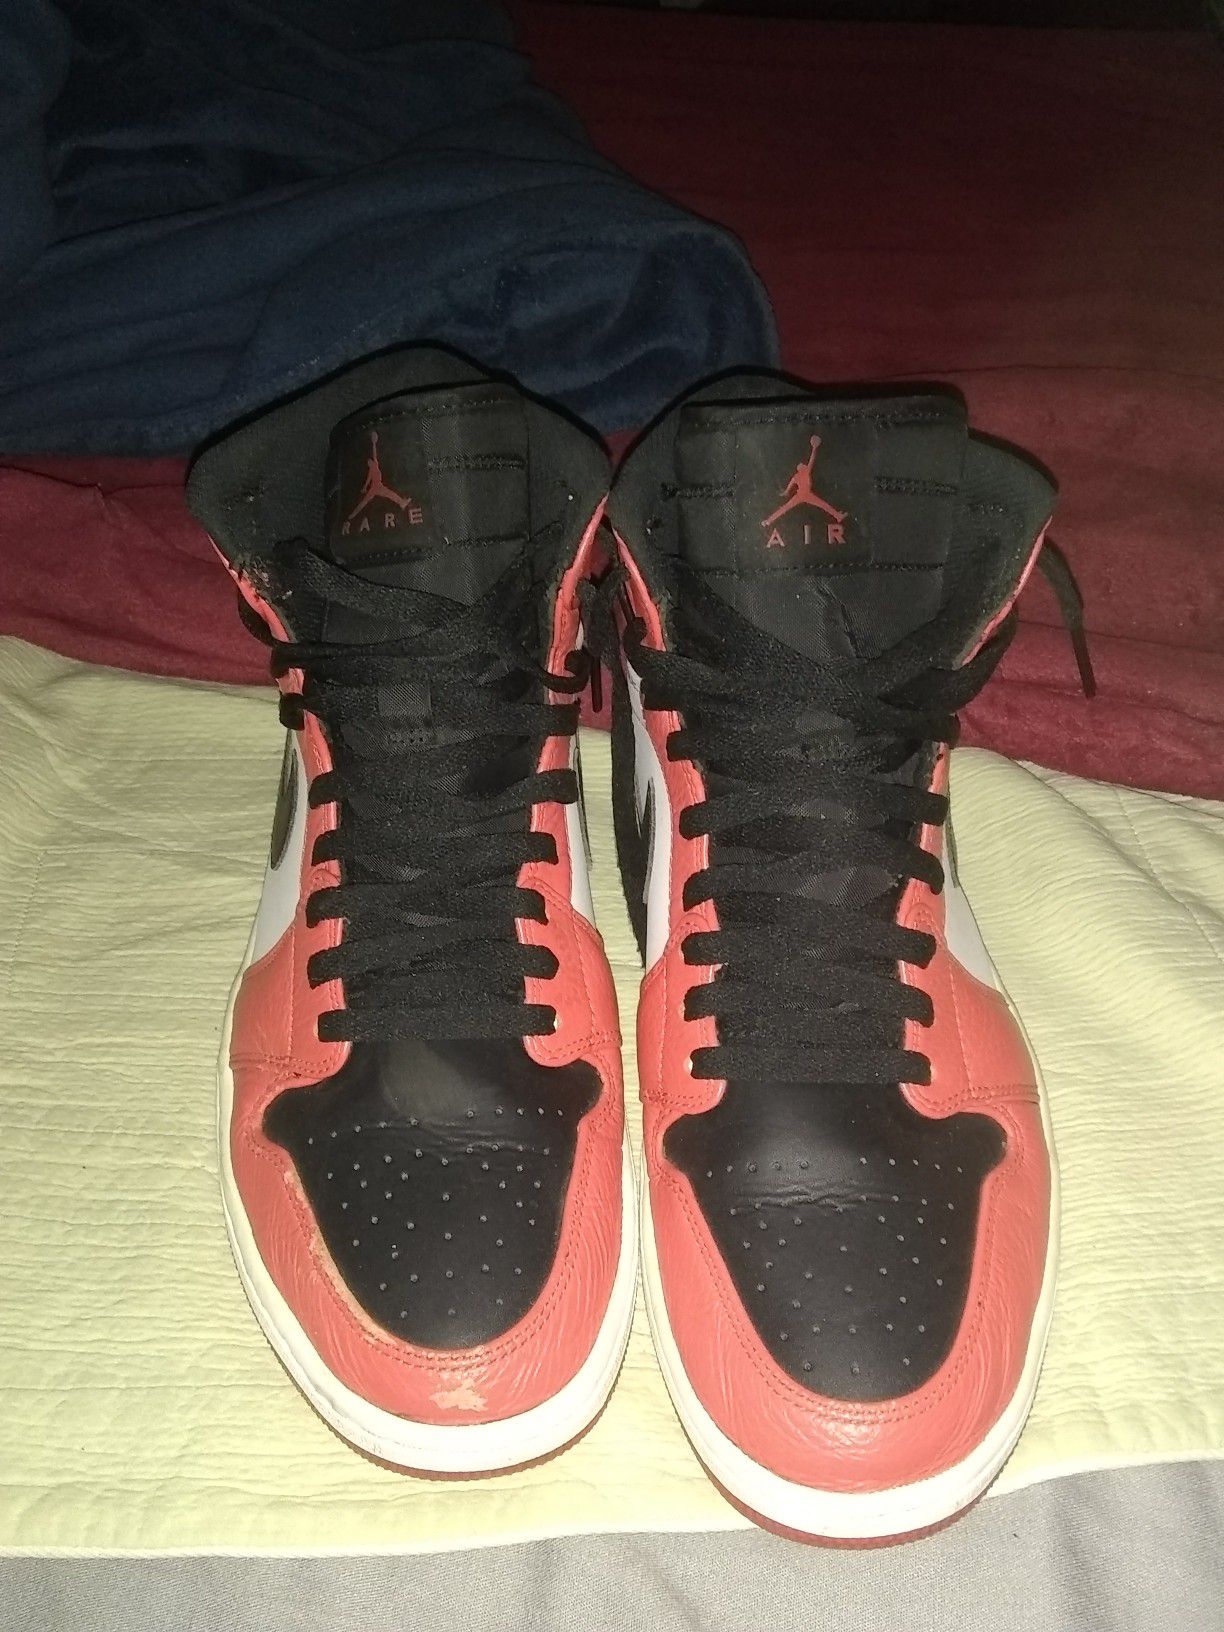 I have a nice pair of air Jordan 1 Rare air size 12 slightly used